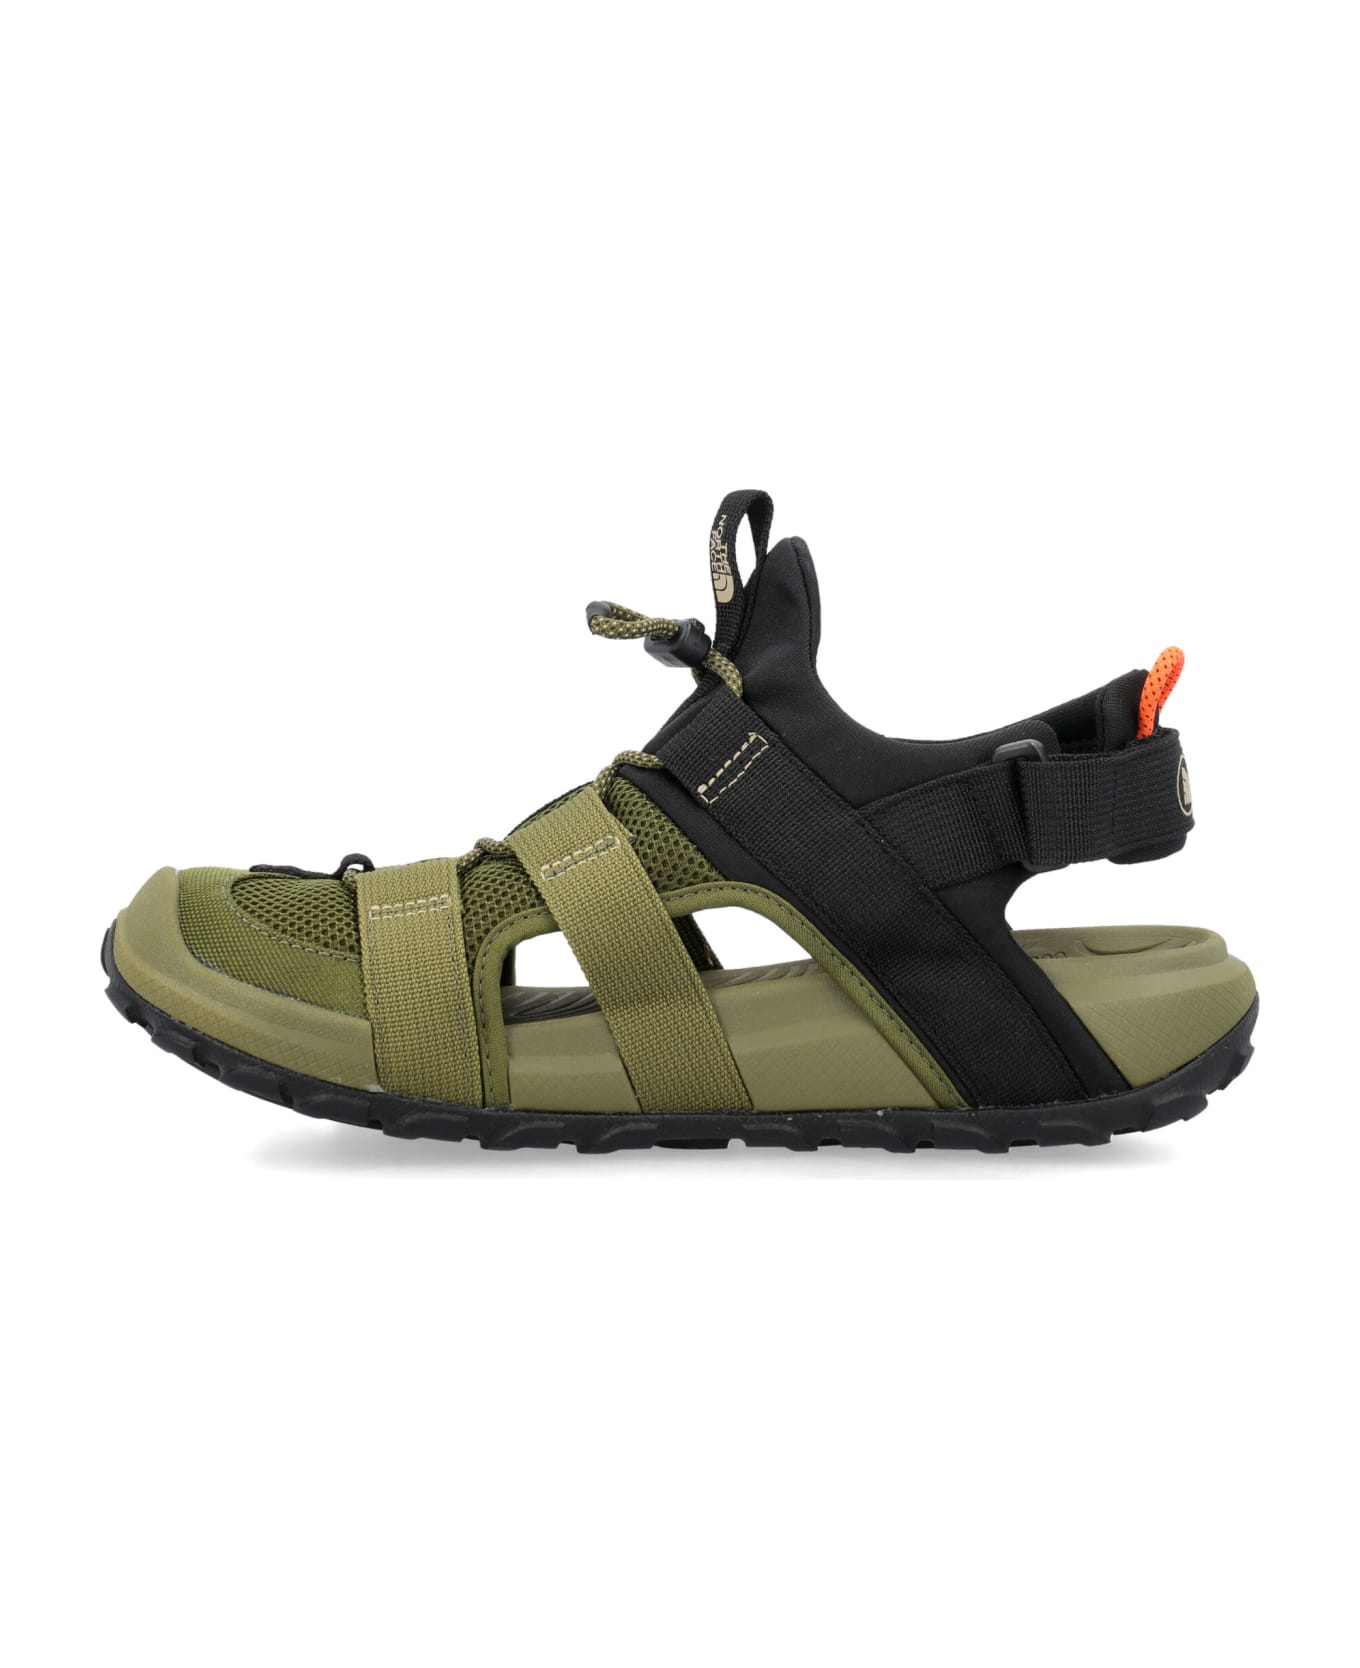 The North Face Explore Camp Shandals - FOREST OLIVE